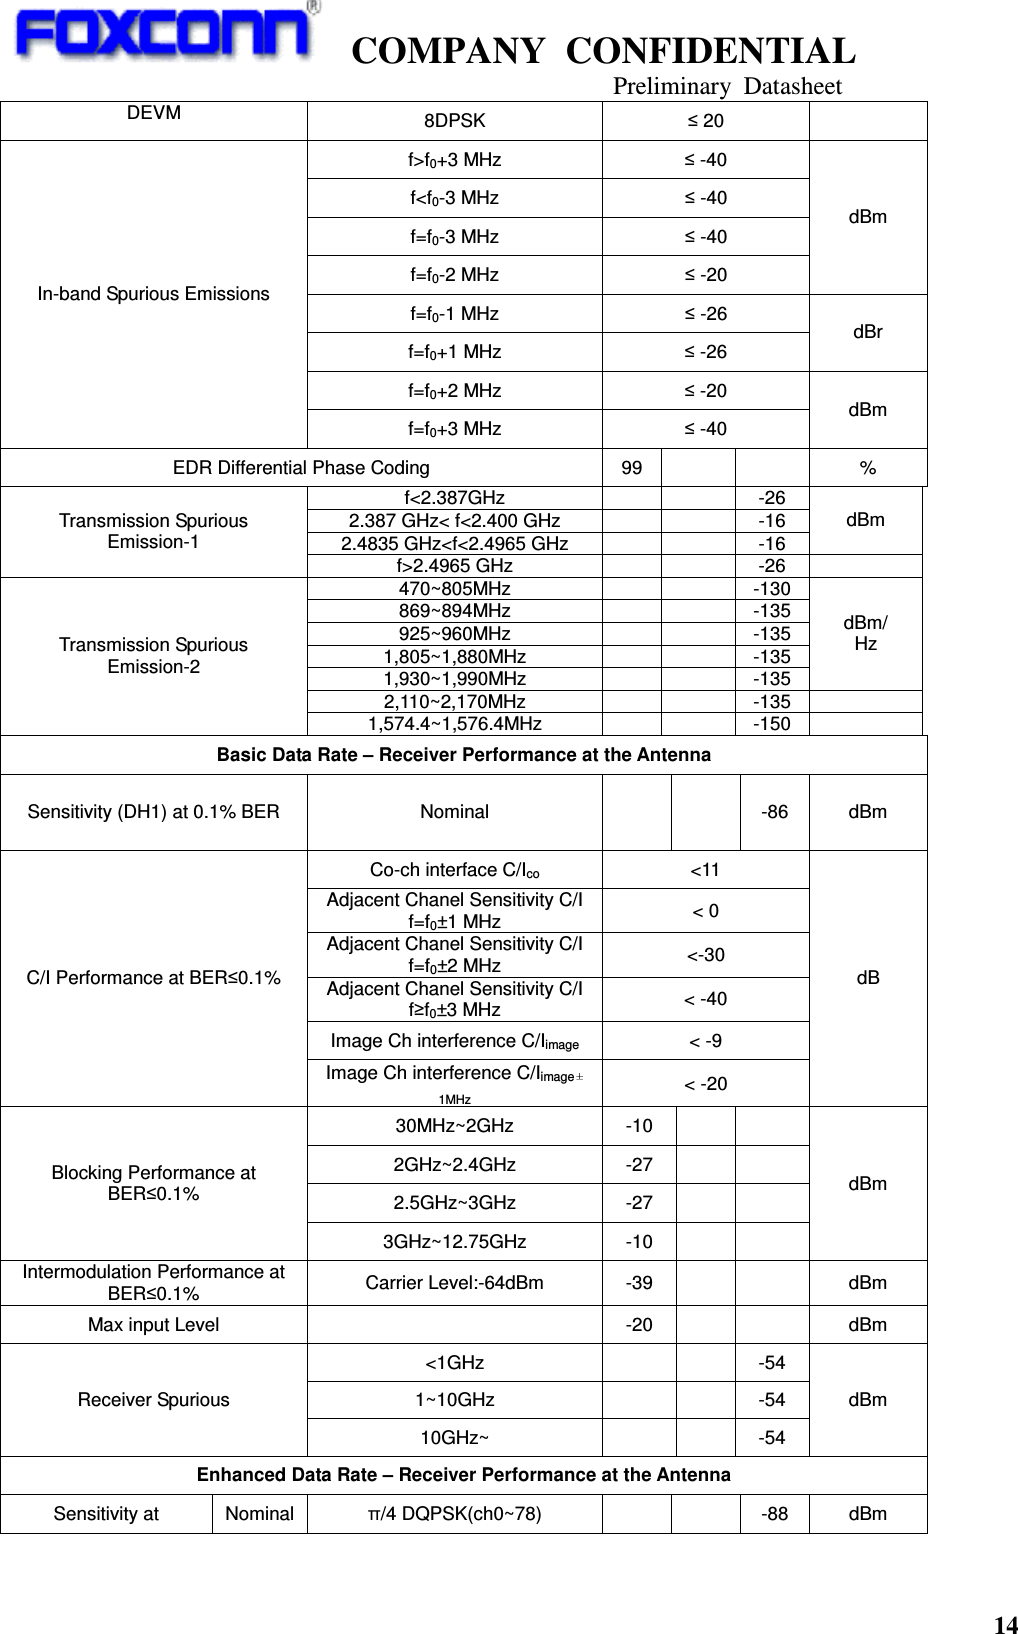    COMPANY  CONFIDENTIAL                                                                     Preliminary  Datasheet 14  DEVM  8DPSK  ≤ 20 f&gt;f0+3 MHz  ≤ -40 f&lt;f0-3 MHz  ≤ -40 f=f0-3 MHz  ≤ -40 f=f0-2 MHz  ≤ -20 dBm f=f0-1 MHz  ≤ -26 f=f0+1 MHz  ≤ -26 dBr f=f0+2 MHz  ≤ -20 In-band Spurious Emissions f=f0+3 MHz  ≤ -40 dBm EDR Differential Phase Coding  99      % f&lt;2.387GHz      -26 2.387 GHz&lt; f&lt;2.400 GHz      -16 2.4835 GHz&lt;f&lt;2.4965 GHz      -16 dBm Transmission Spurious Emission-1 f&gt;2.4965 GHz      -26   470~805MHz      -130 869~894MHz      -135 925~960MHz      -135 1,805~1,880MHz      -135 1,930~1,990MHz      -135 dBm/ Hz 2,110~2,170MHz      -135  Transmission Spurious Emission-2 1,574.4~1,576.4MHz      -150  Basic Data Rate – Receiver Performance at the Antenna Sensitivity (DH1) at 0.1% BER  Nominal      -86  dBm Co-ch interface C/Ico  &lt;11 Adjacent Chanel Sensitivity C/I f=f0±1 MHz  &lt; 0 Adjacent Chanel Sensitivity C/I f=f0±2 MHz  &lt;-30 Adjacent Chanel Sensitivity C/I f≥f0±3 MHz  &lt; -40 Image Ch interference C/Iimage  &lt; -9 C/I Performance at BER≤0.1% Image Ch interference C/Iimage1MHz &lt; -20 dB 30MHz~2GHz  -10     2GHz~2.4GHz  -27     2.5GHz~3GHz  -27     Blocking Performance at BER≤0.1% 3GHz~12.75GHz  -10     dBm Intermodulation Performance at BER≤0.1%  Carrier Level:-64dBm  -39      dBm Max input Level    -20      dBm &lt;1GHz      -54 1~10GHz      -54 Receiver Spurious 10GHz~      -54 dBm Enhanced Data Rate – Receiver Performance at the Antenna Sensitivity at  Nominal π/4 DQPSK(ch0~78)      -88  dBm 